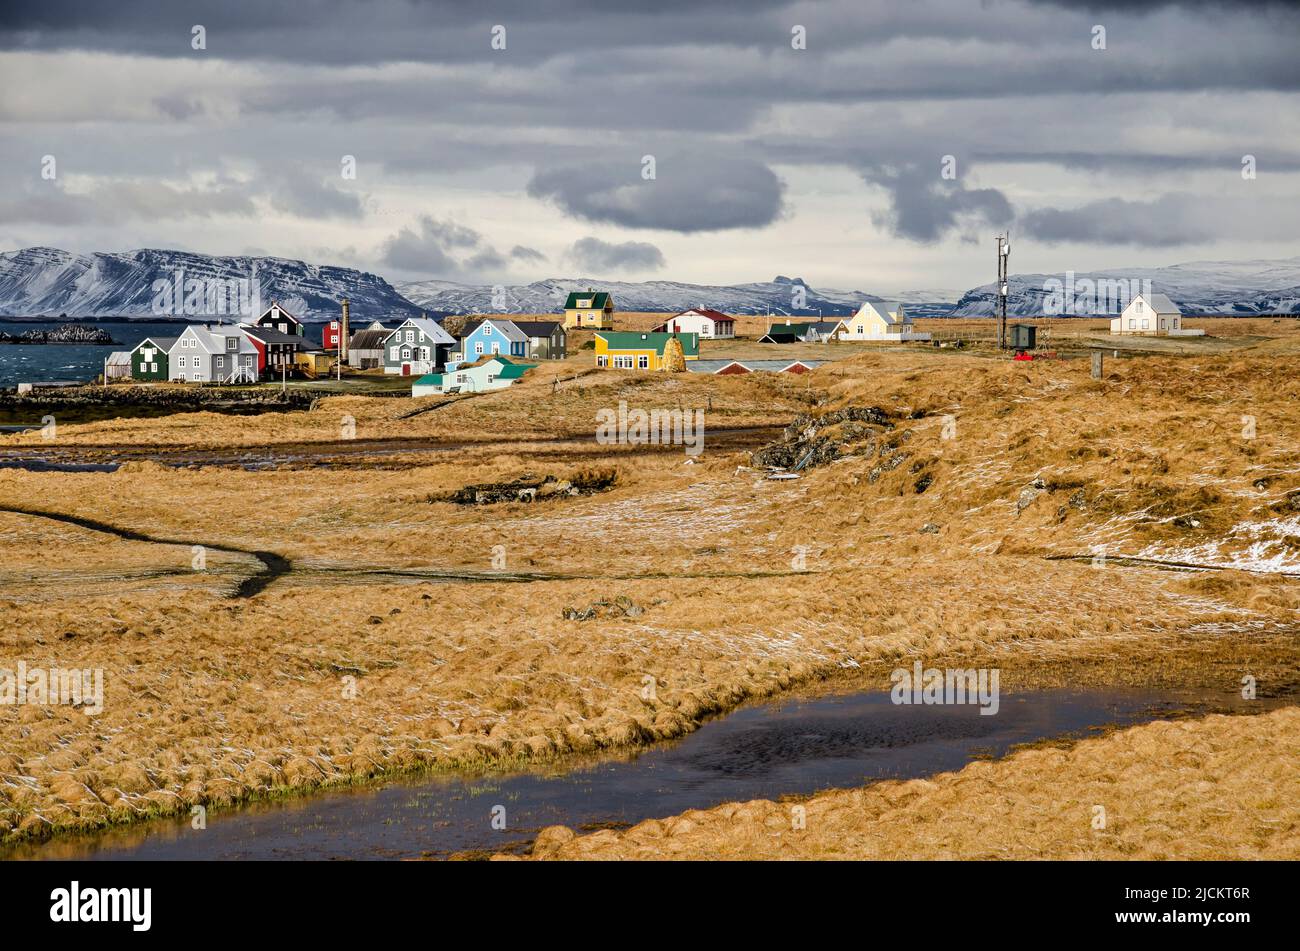 Flatey, Iceland, May 5, 2022: view across the yellow-brown fields, partly snow-covered, towards the village and the fjord and mountains beyond Stock Photo